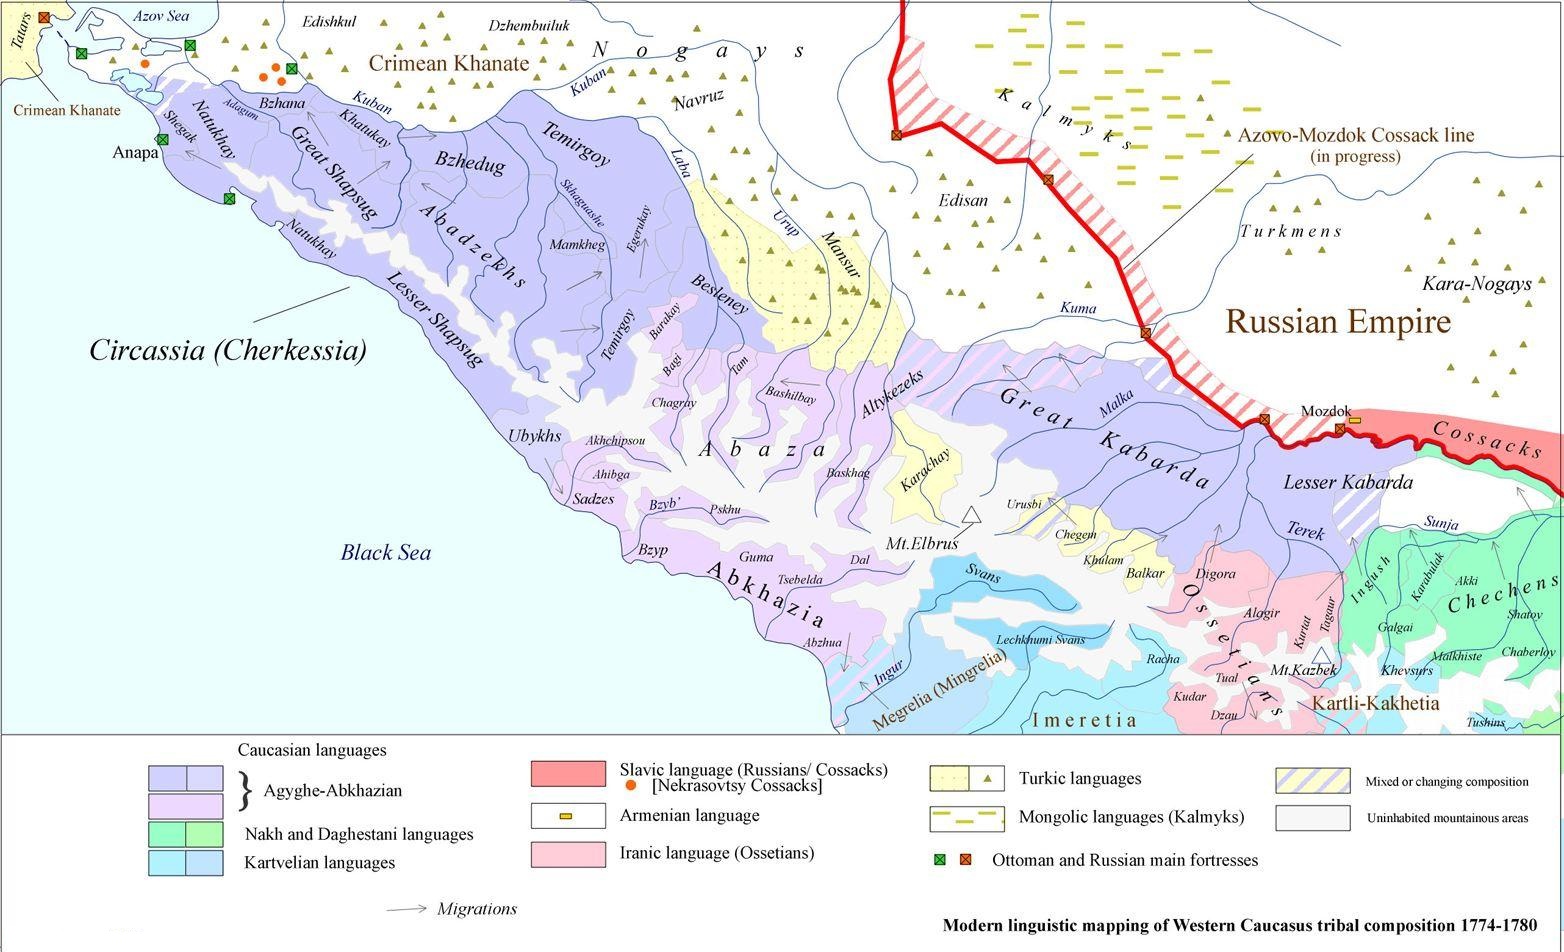 Modern linguistic mapping of Western Caucasus tribal composition 1774-1780, by Artur Tsutsiev